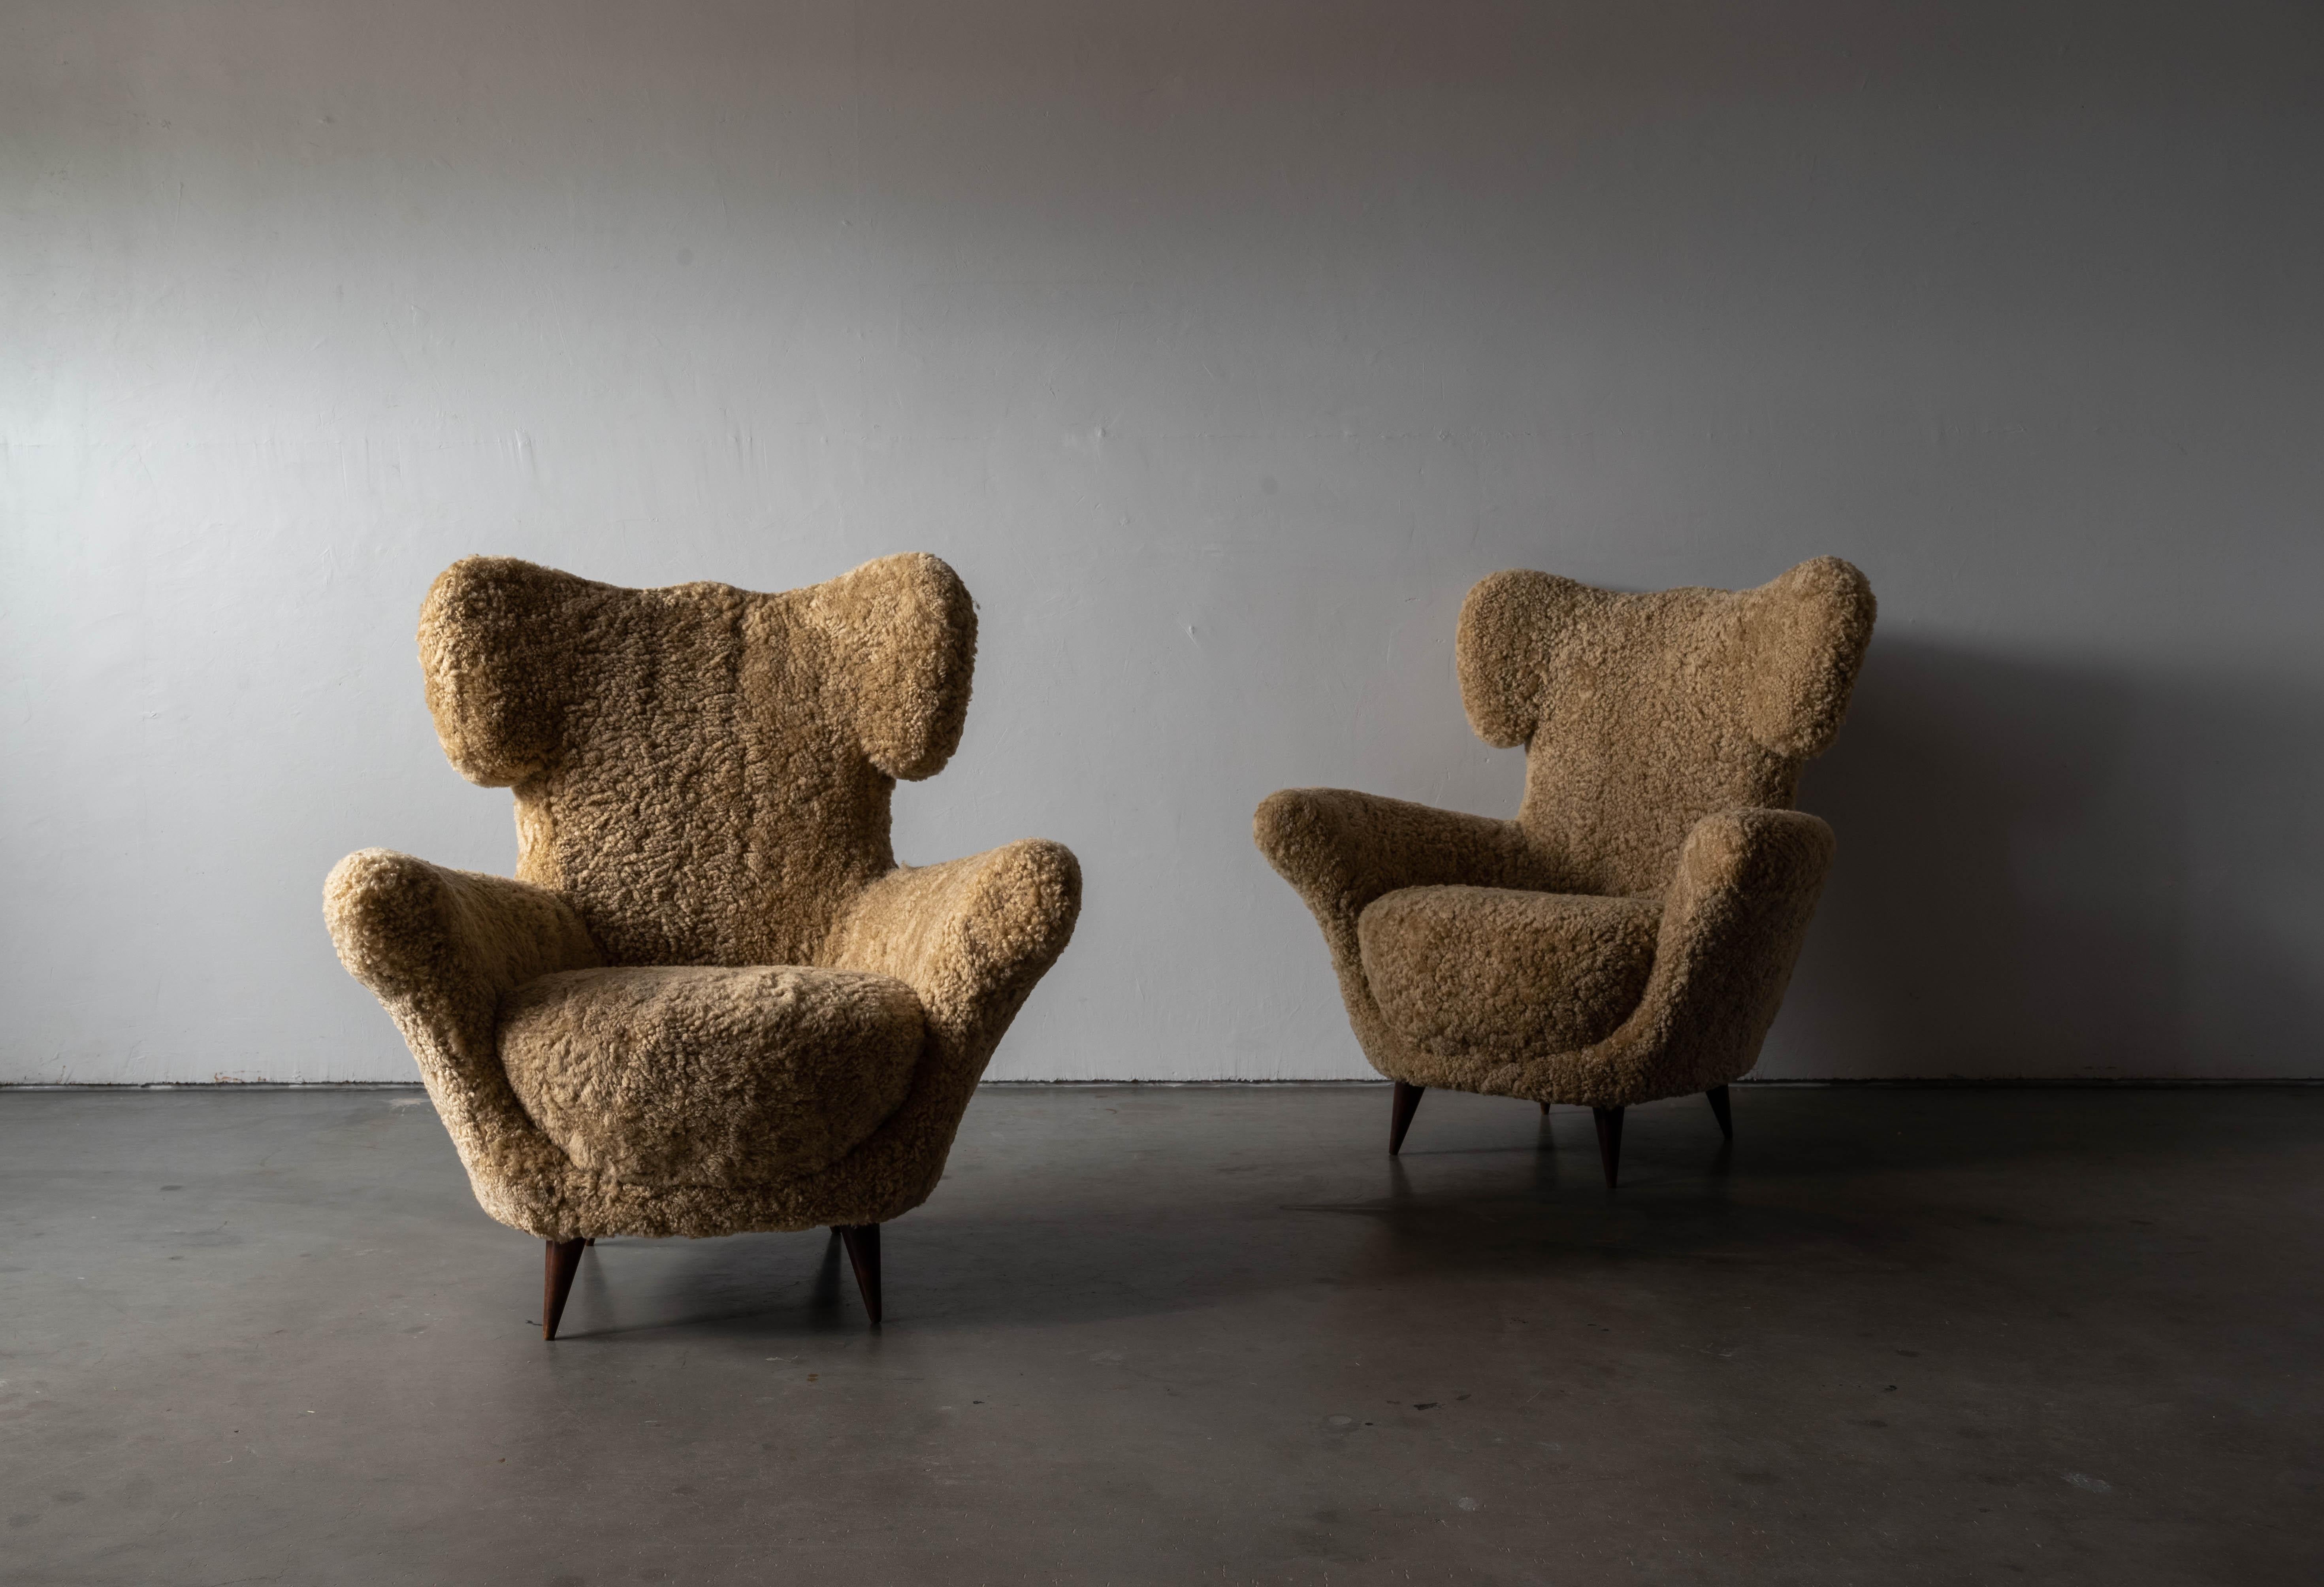 A pair of wood and shearling lounge chairs, design attributed to Maurizio Tempestini, Italy, c. 1950.